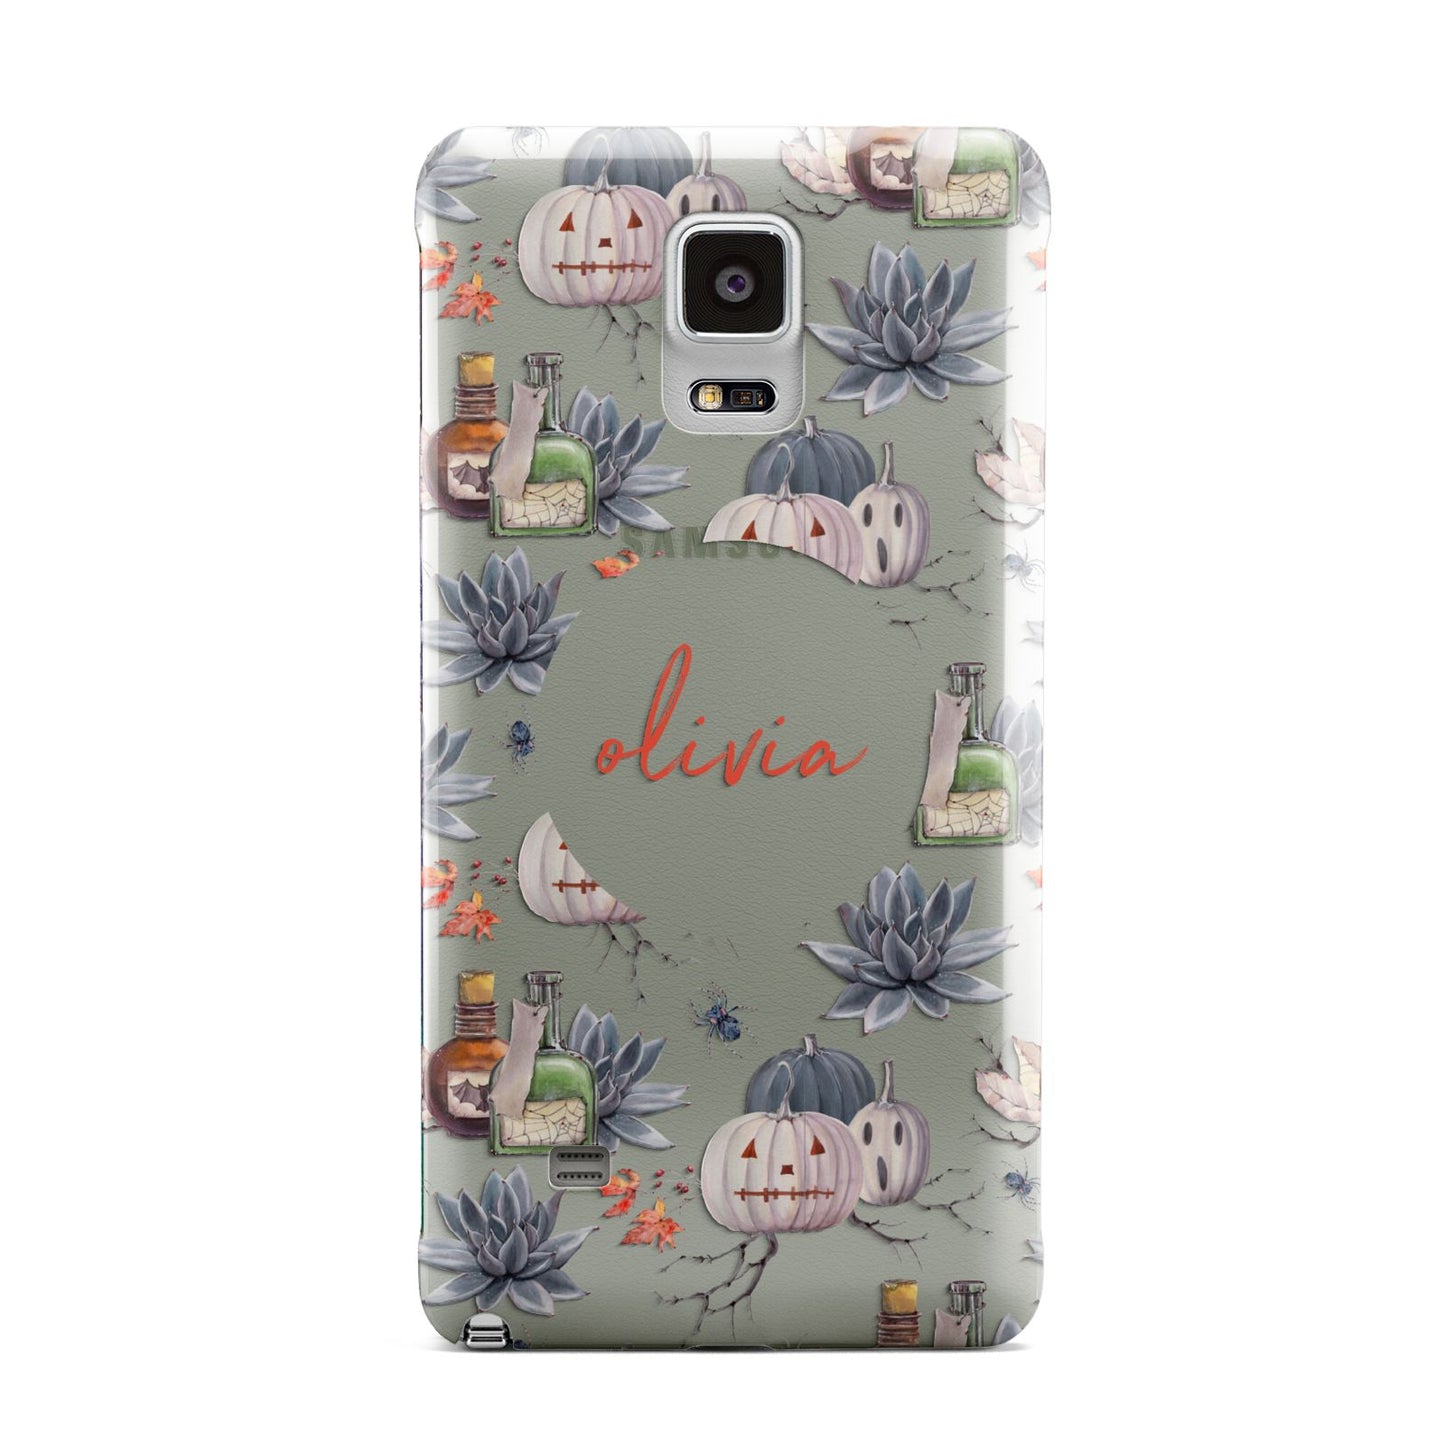 Personalised Floral Name Halloween Samsung Galaxy Note 4 Case